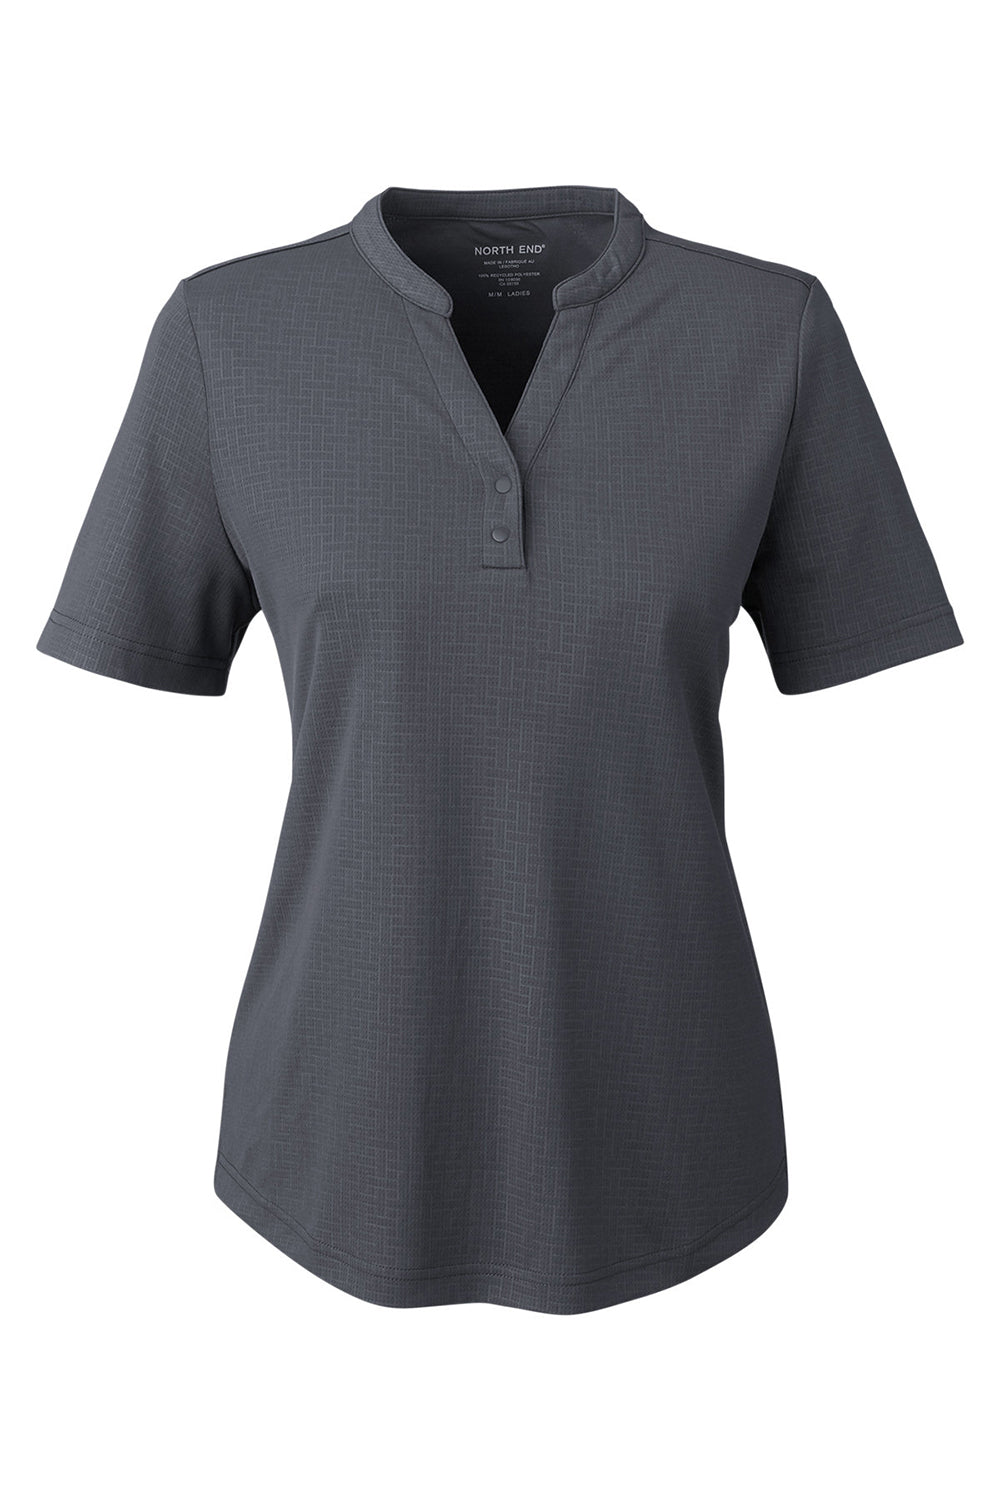 Recycled Sleeve Replay Grey Shirt — Short North Moisture End Polo Wicking Womens NE102W Carbon